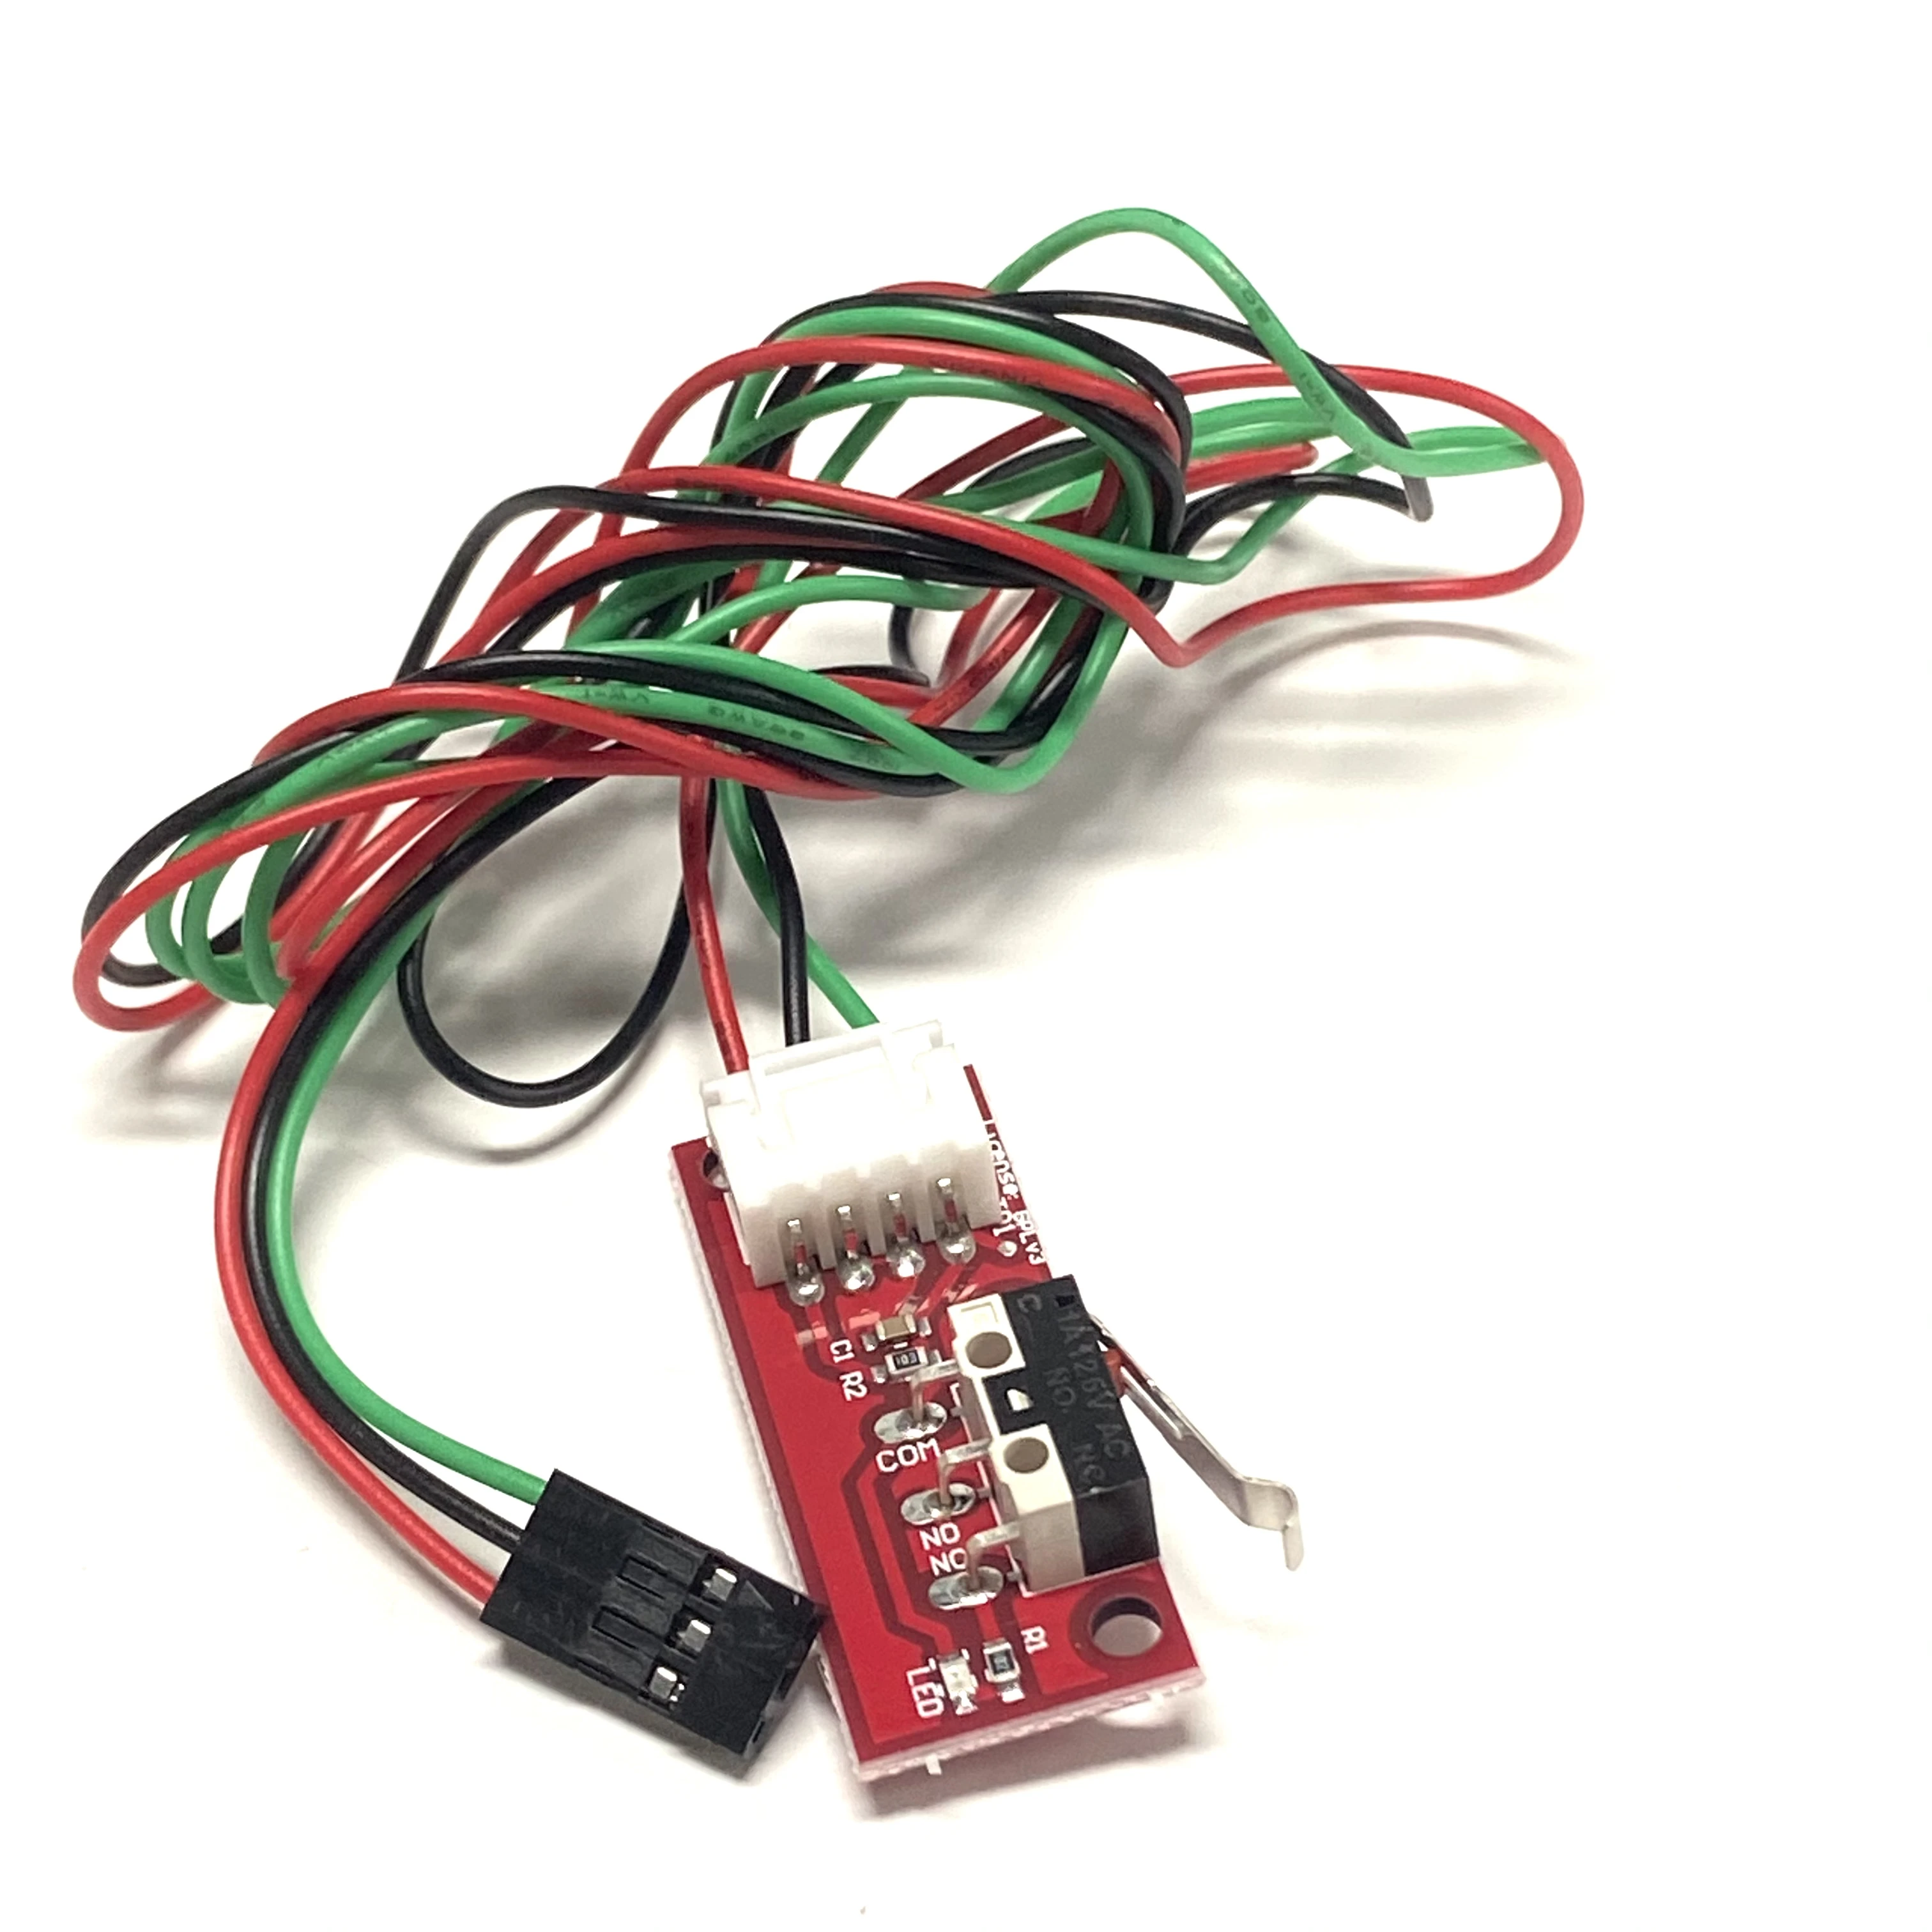 1Pcs Mechanical Endstop Switch 3D Printer Ramps 1.4 Control Board Part Limit Switch with 3 Pin 70cm Connecting Cable